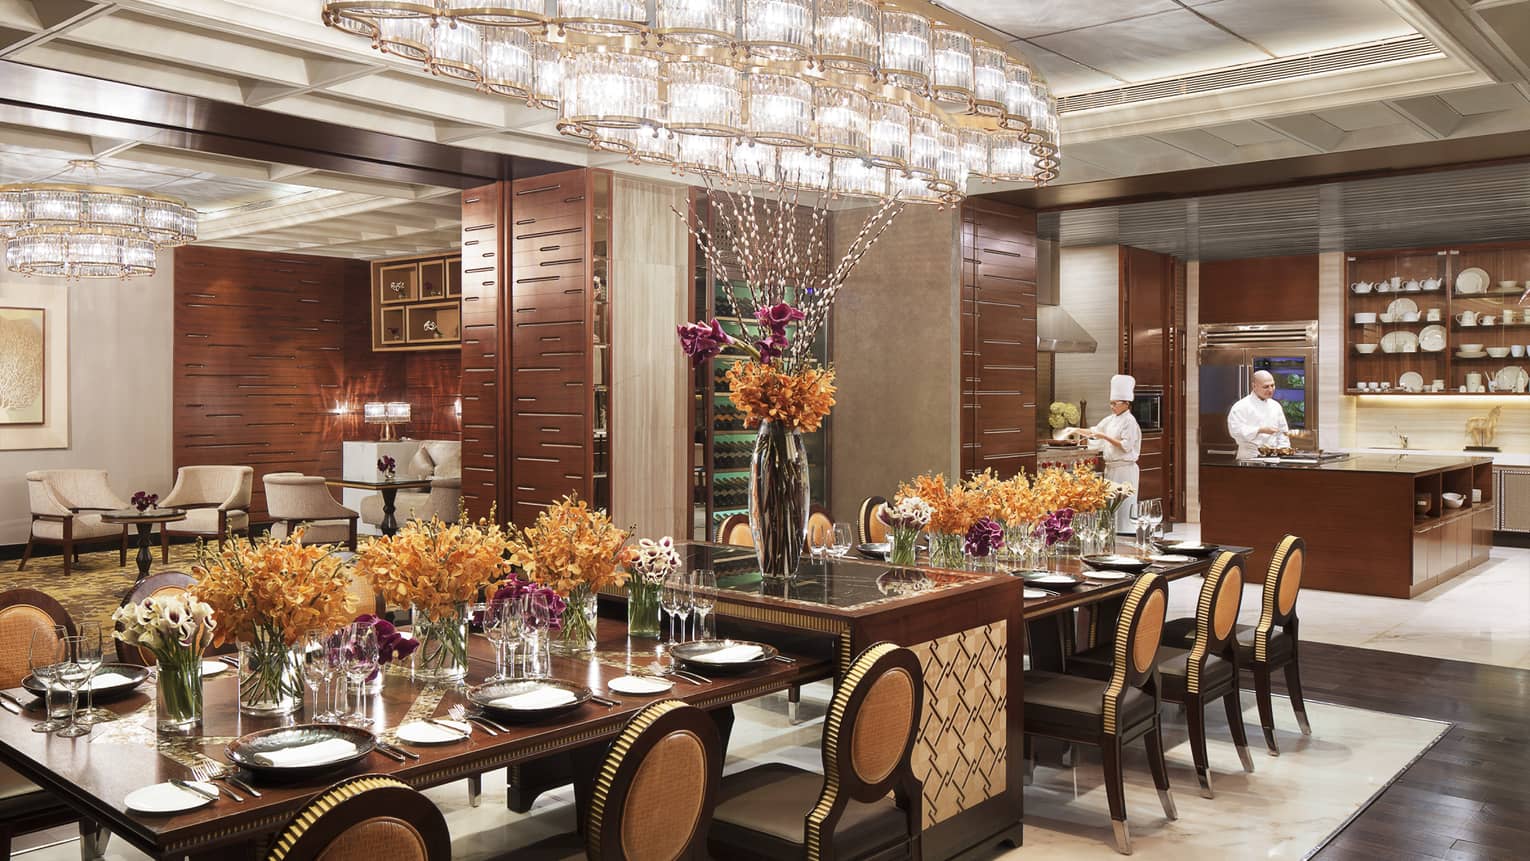 The Kitchen room, long private banquet dining table with orange flowers under rows of crystal lights 